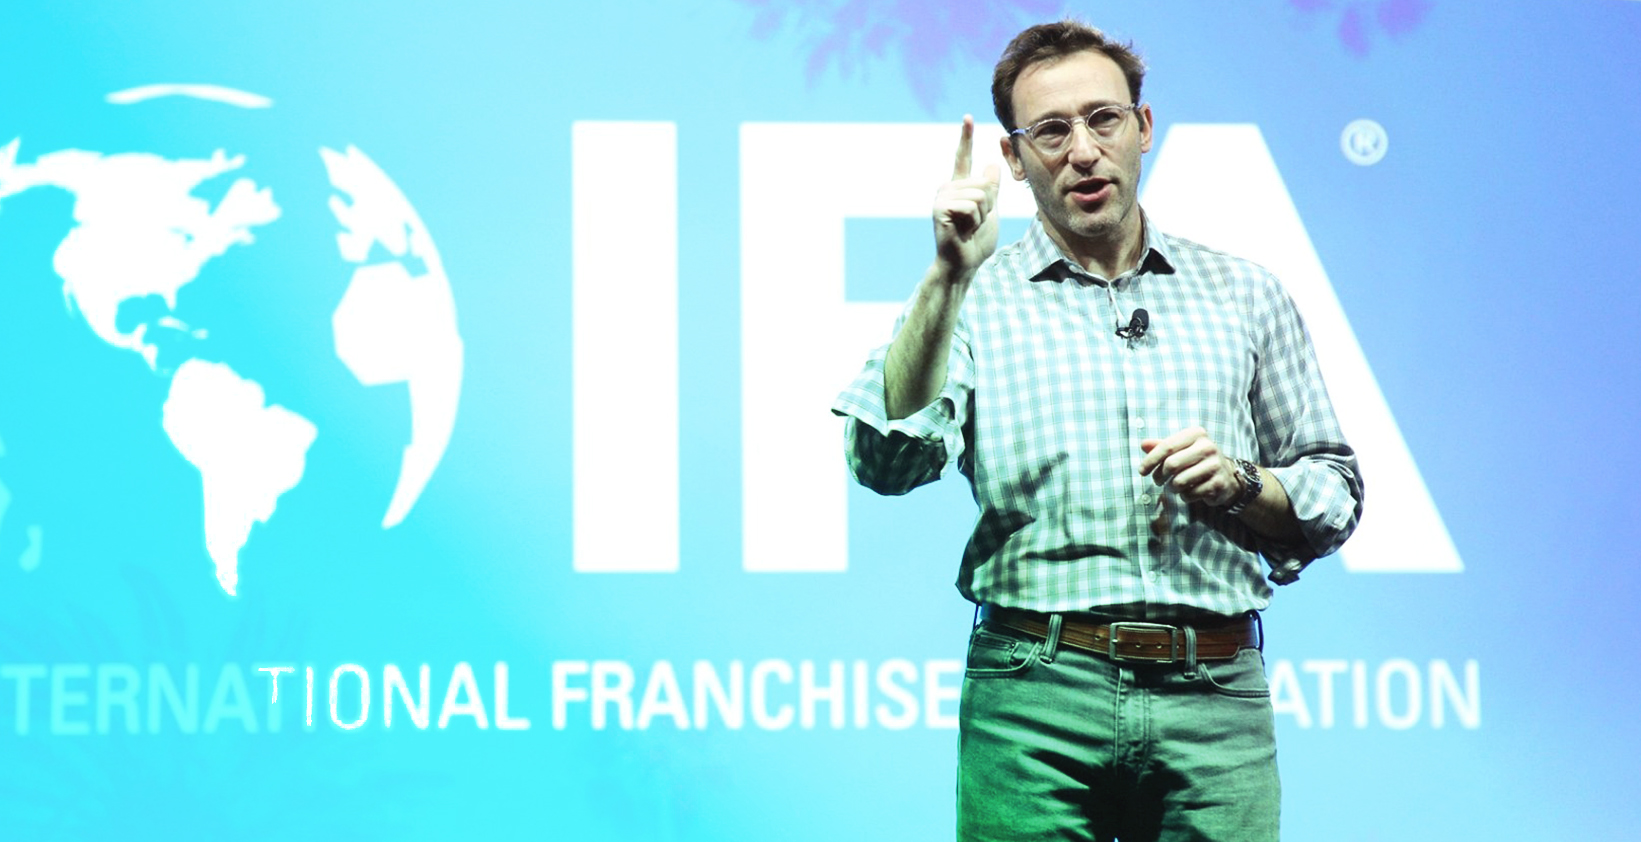 Simon Sinek and Beyond: Our Top Takeaways From IFA2020